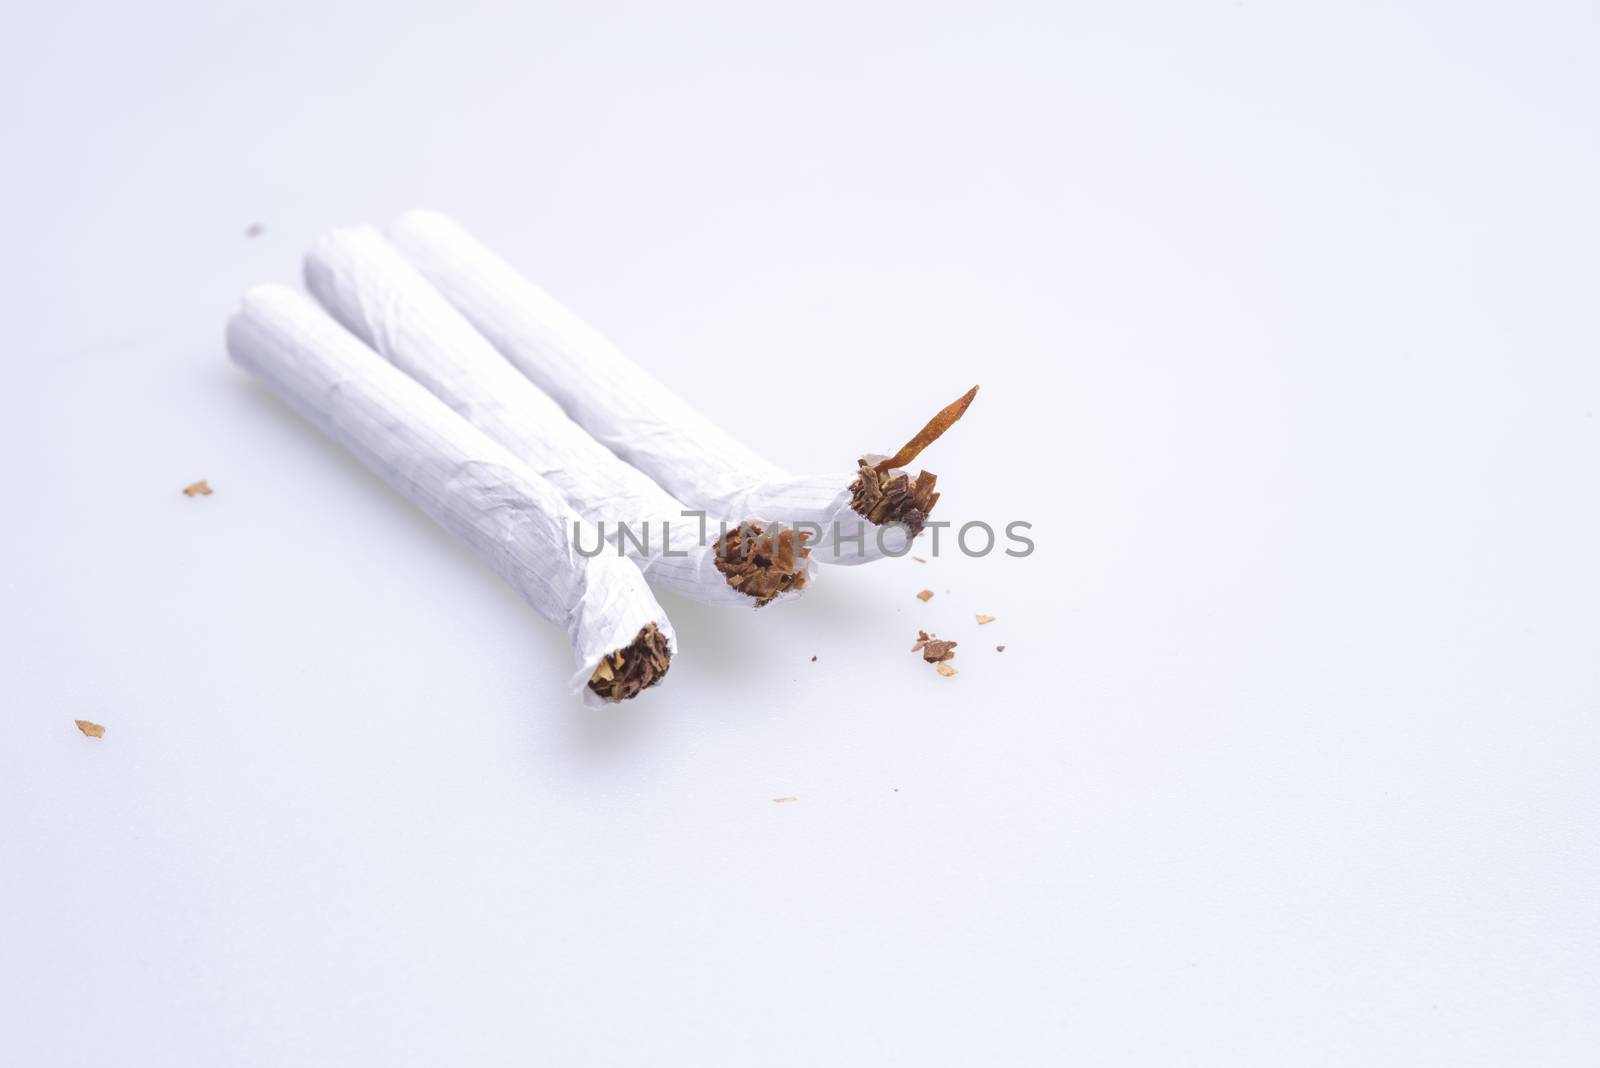 Squeezed cigarettes on the table, over a white background